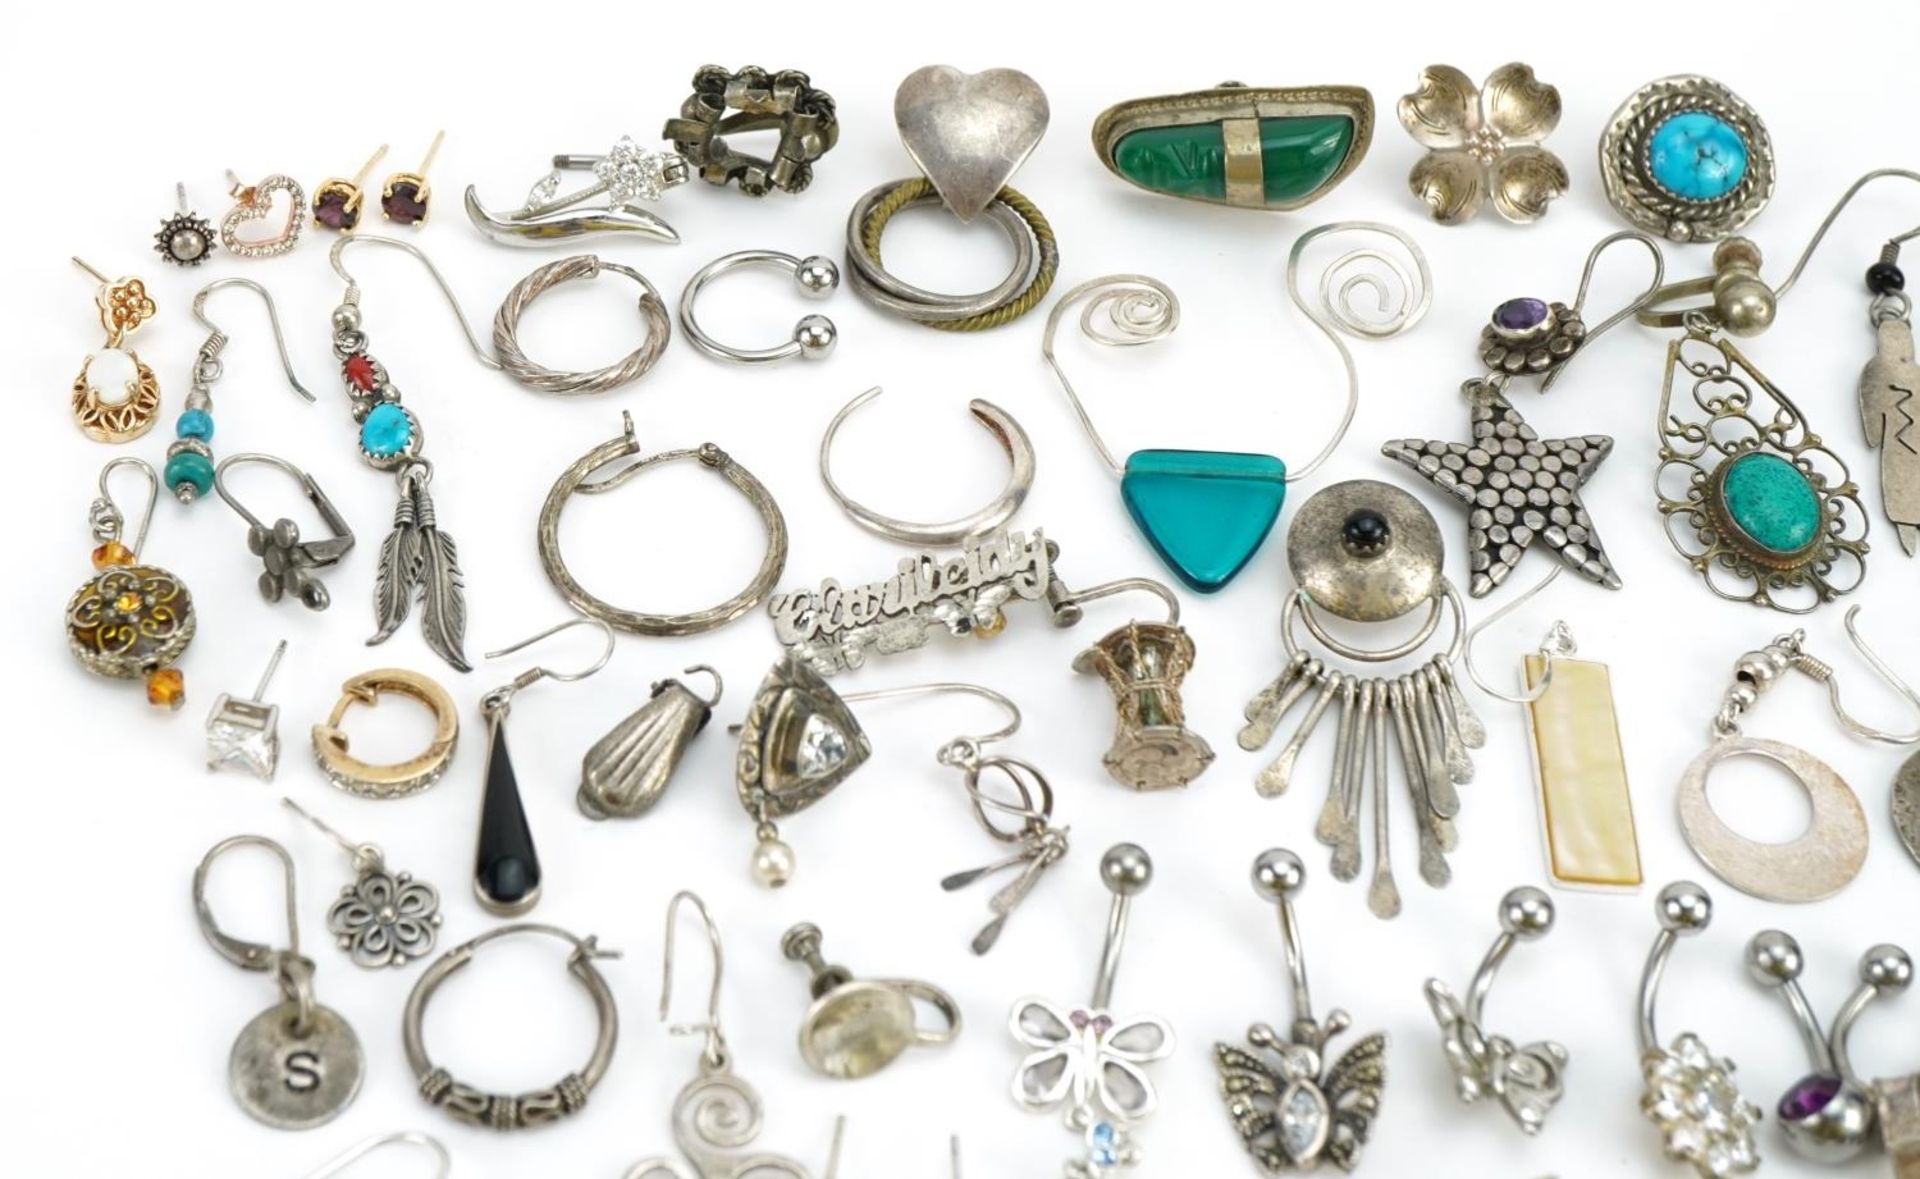 Vintage and later silver and white metal jewellery including earrings, pendants and blue enamel - Image 2 of 5